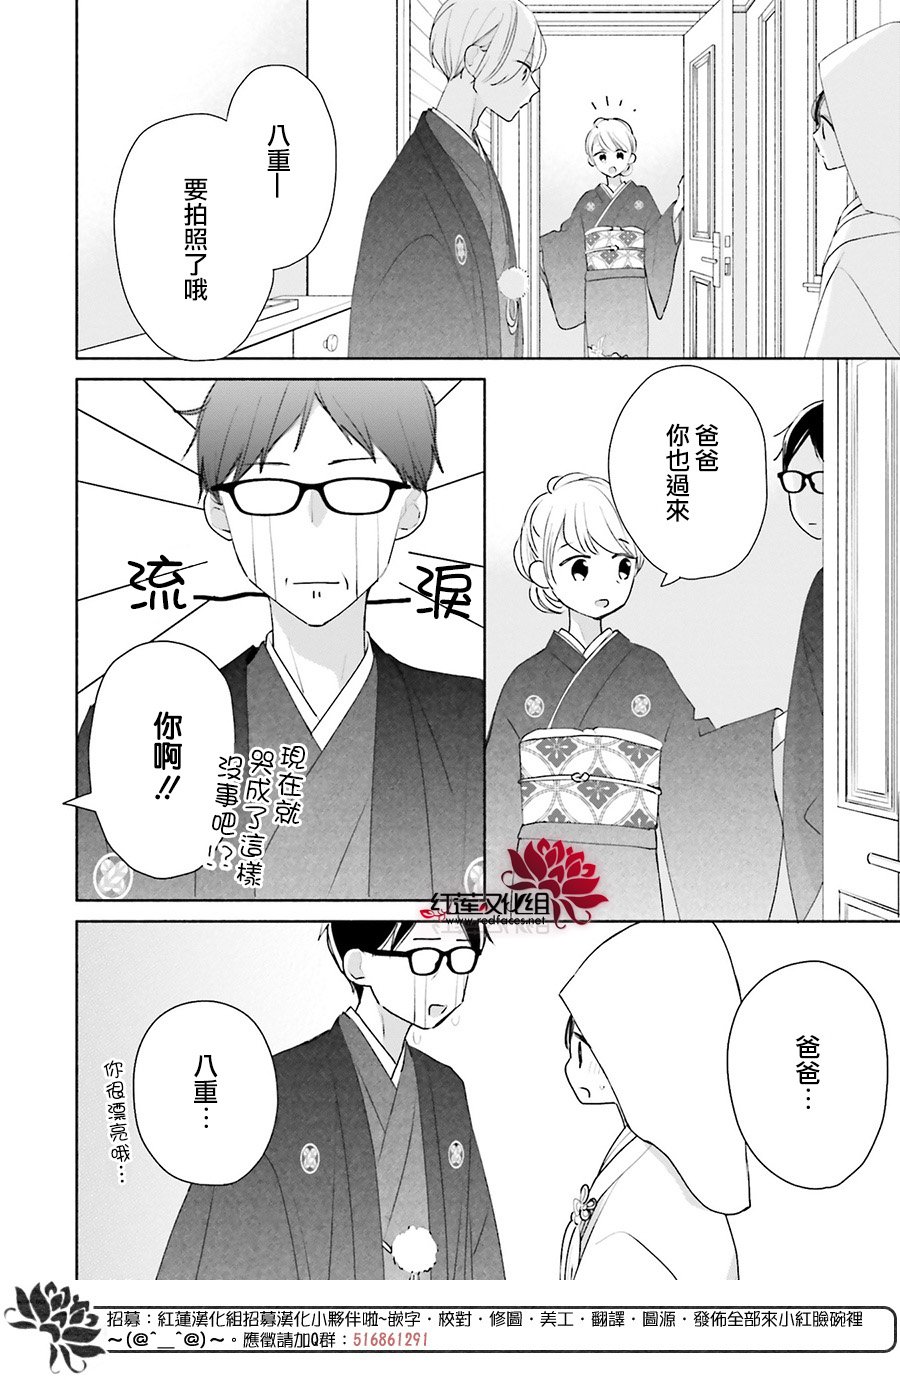 If given a second chance - 第46話(2/2) - 2